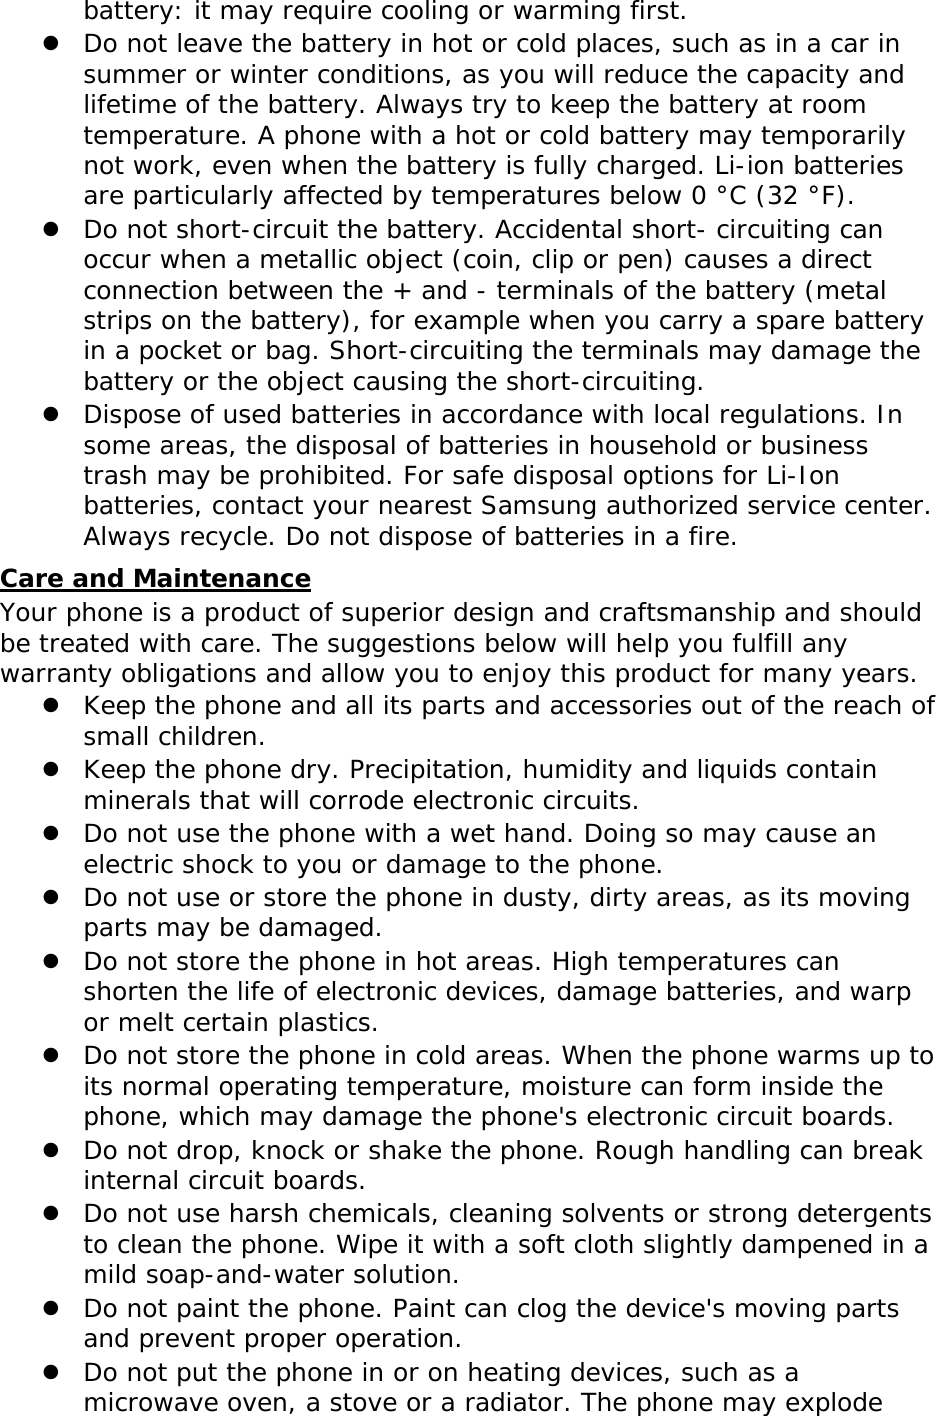 battery: it may require cooling or warming first. z Do not leave the battery in hot or cold places, such as in a car in summer or winter conditions, as you will reduce the capacity and lifetime of the battery. Always try to keep the battery at room temperature. A phone with a hot or cold battery may temporarily not work, even when the battery is fully charged. Li-ion batteries are particularly affected by temperatures below 0 °C (32 °F). z Do not short-circuit the battery. Accidental short- circuiting can occur when a metallic object (coin, clip or pen) causes a direct connection between the + and - terminals of the battery (metal strips on the battery), for example when you carry a spare battery in a pocket or bag. Short-circuiting the terminals may damage the battery or the object causing the short-circuiting. z Dispose of used batteries in accordance with local regulations. In some areas, the disposal of batteries in household or business trash may be prohibited. For safe disposal options for Li-Ion batteries, contact your nearest Samsung authorized service center. Always recycle. Do not dispose of batteries in a fire. Care and Maintenance Your phone is a product of superior design and craftsmanship and should be treated with care. The suggestions below will help you fulfill any warranty obligations and allow you to enjoy this product for many years. z Keep the phone and all its parts and accessories out of the reach of small children. z Keep the phone dry. Precipitation, humidity and liquids contain minerals that will corrode electronic circuits. z Do not use the phone with a wet hand. Doing so may cause an electric shock to you or damage to the phone. z Do not use or store the phone in dusty, dirty areas, as its moving parts may be damaged. z Do not store the phone in hot areas. High temperatures can shorten the life of electronic devices, damage batteries, and warp or melt certain plastics. z Do not store the phone in cold areas. When the phone warms up to its normal operating temperature, moisture can form inside the phone, which may damage the phone&apos;s electronic circuit boards. z Do not drop, knock or shake the phone. Rough handling can break internal circuit boards. z Do not use harsh chemicals, cleaning solvents or strong detergents to clean the phone. Wipe it with a soft cloth slightly dampened in a mild soap-and-water solution. z Do not paint the phone. Paint can clog the device&apos;s moving parts and prevent proper operation. z Do not put the phone in or on heating devices, such as a microwave oven, a stove or a radiator. The phone may explode 